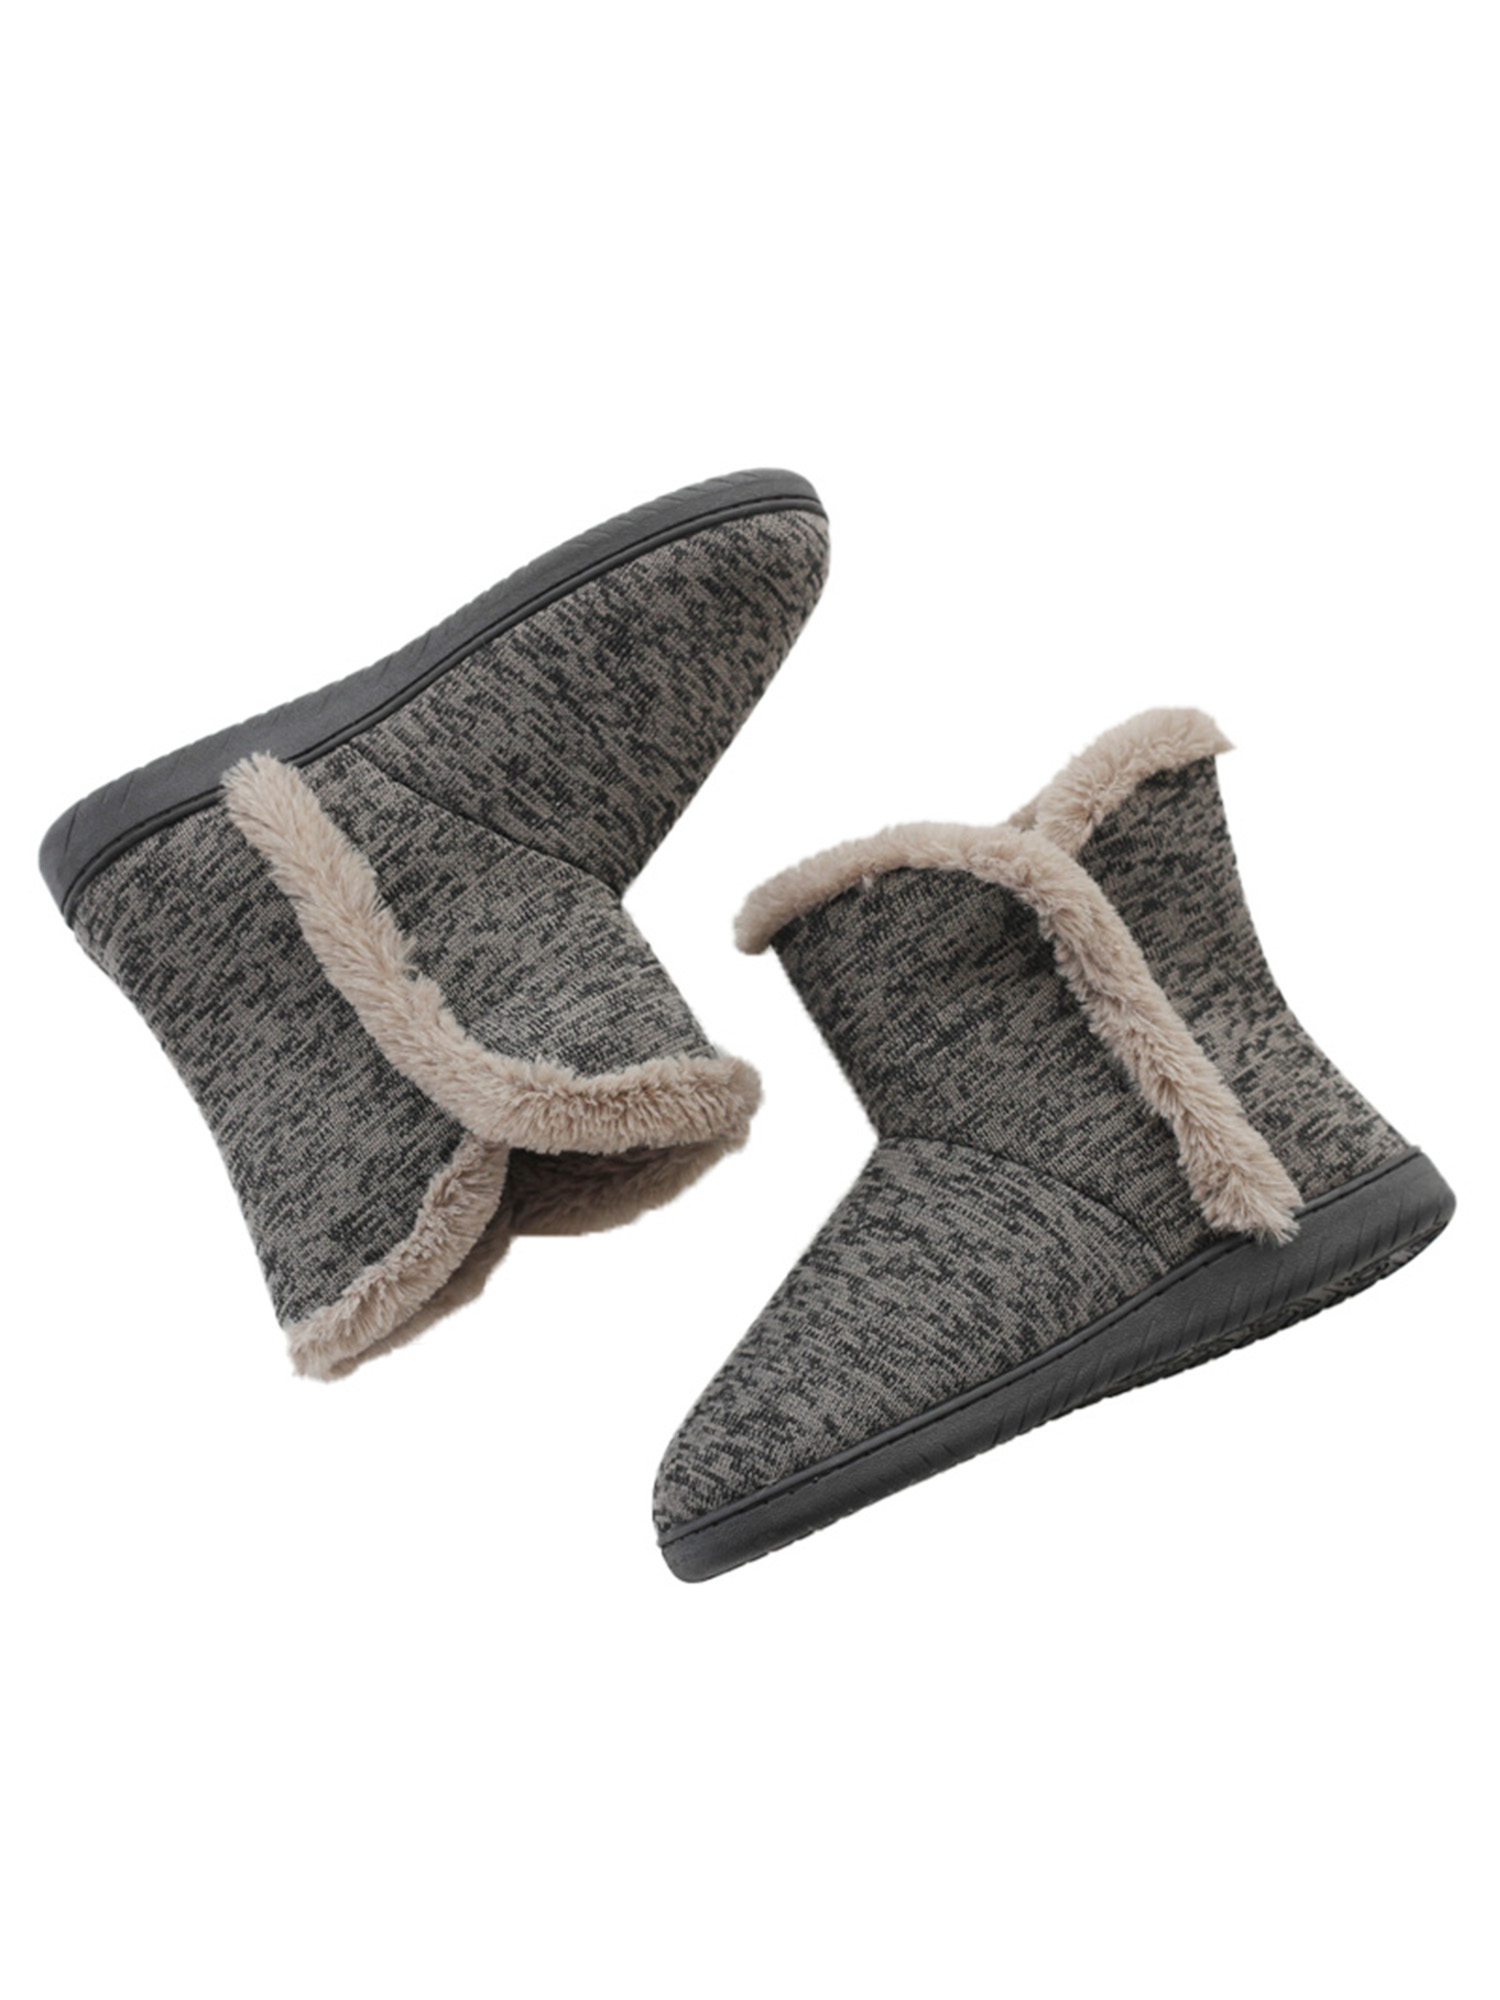 Mens Bootie Slippers Solid Plush House Shoes Winter Boots Warm Gray WAV1 - image 3 of 4